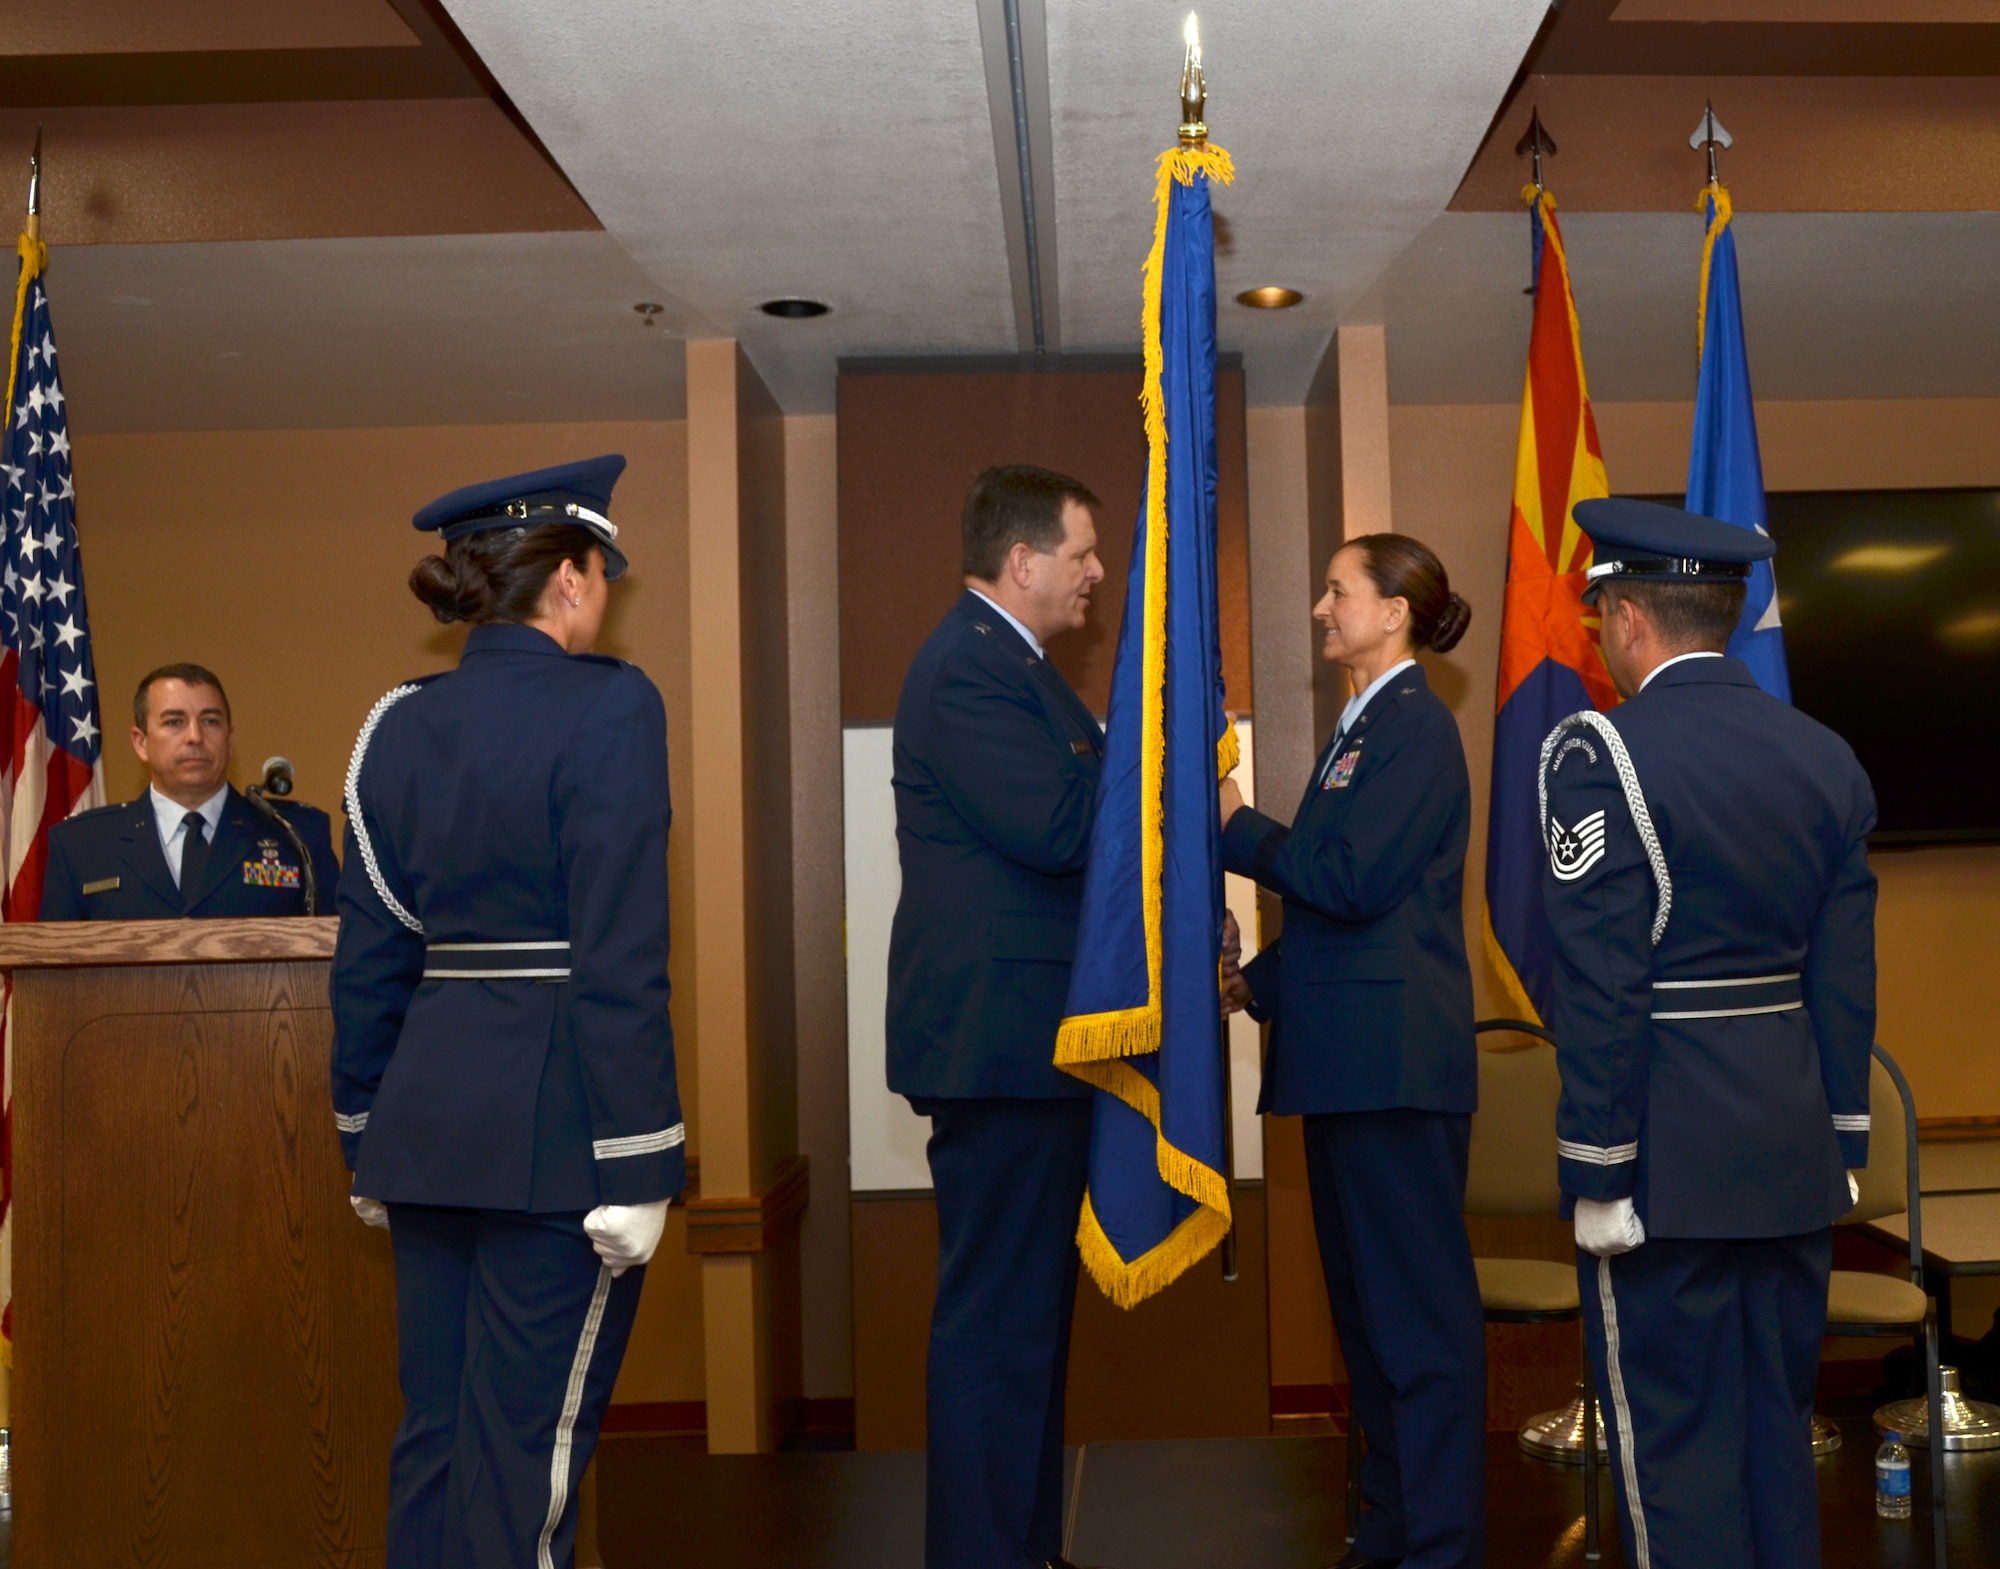 U.S. Air Force Brig. Gen. Michael McGuire, the Adjutant General of Arizona, presents Brig. Gen. Kerry L. Muehlenbeck, Arizona Army and Air Guard Joint Operations officer, a general’s flag during her promotion ceremony at the 161st Air Refueling Wing, Phoenix, June 7, 2014. Brig. Gen. Muehlenbeck is the first woman to serve as a general officer in the Arizona Air National Guard. (U.S. Air National Guard photo by Senior Airman Rashaunda Williams/Released)